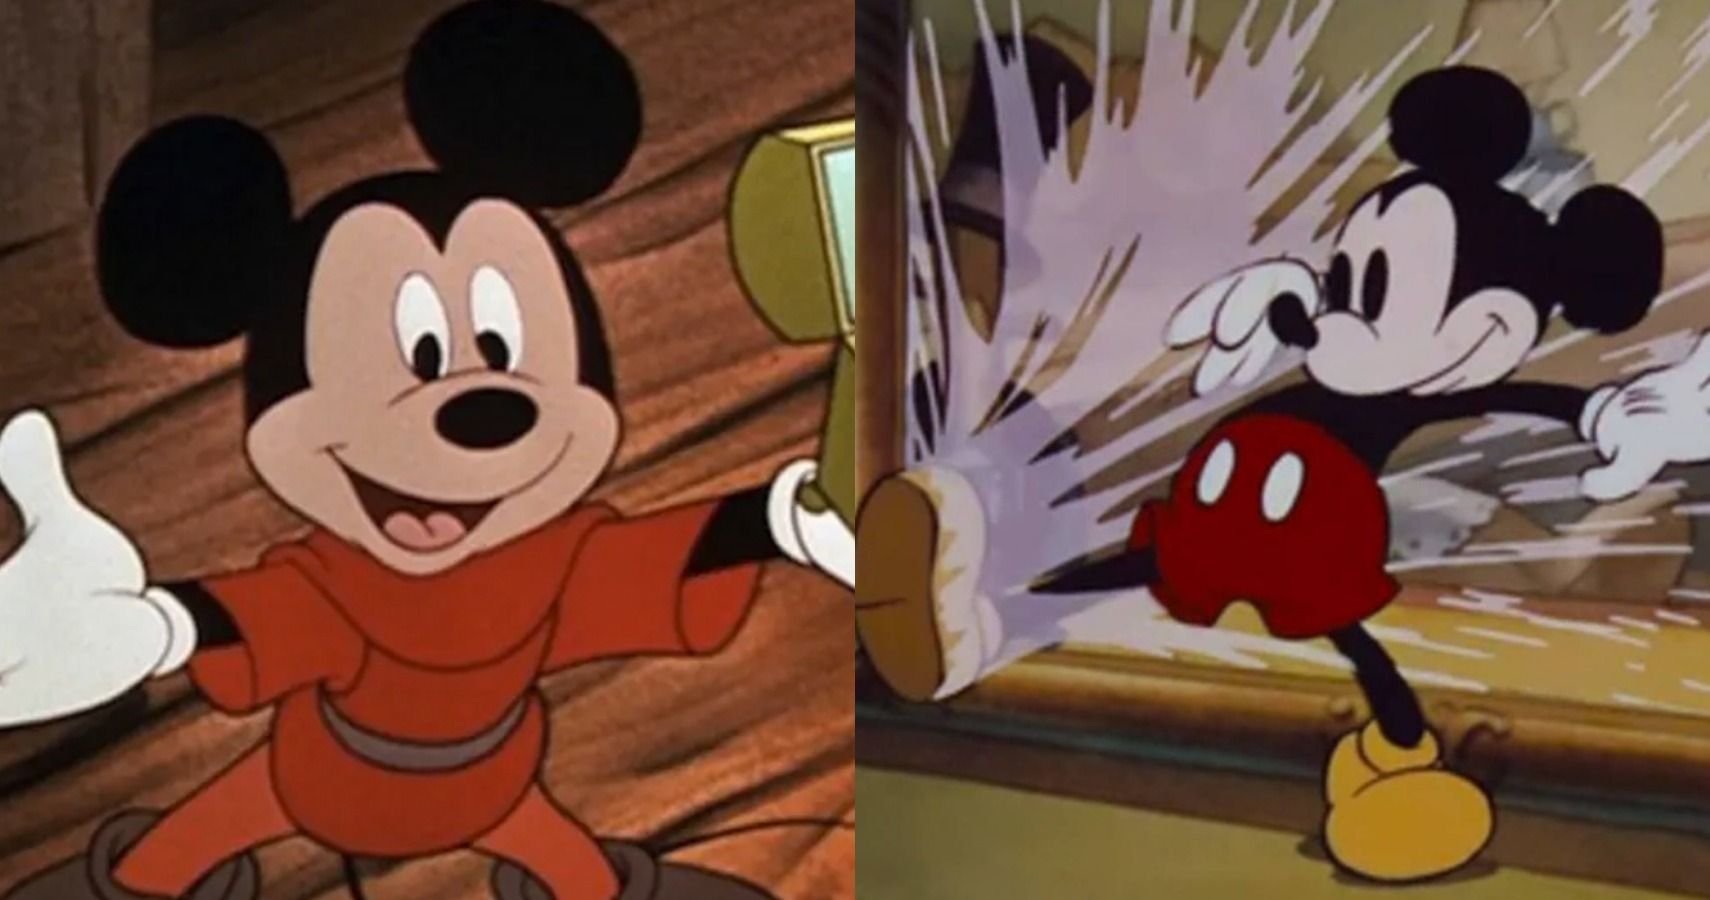 Mickey's cartoons positioned together